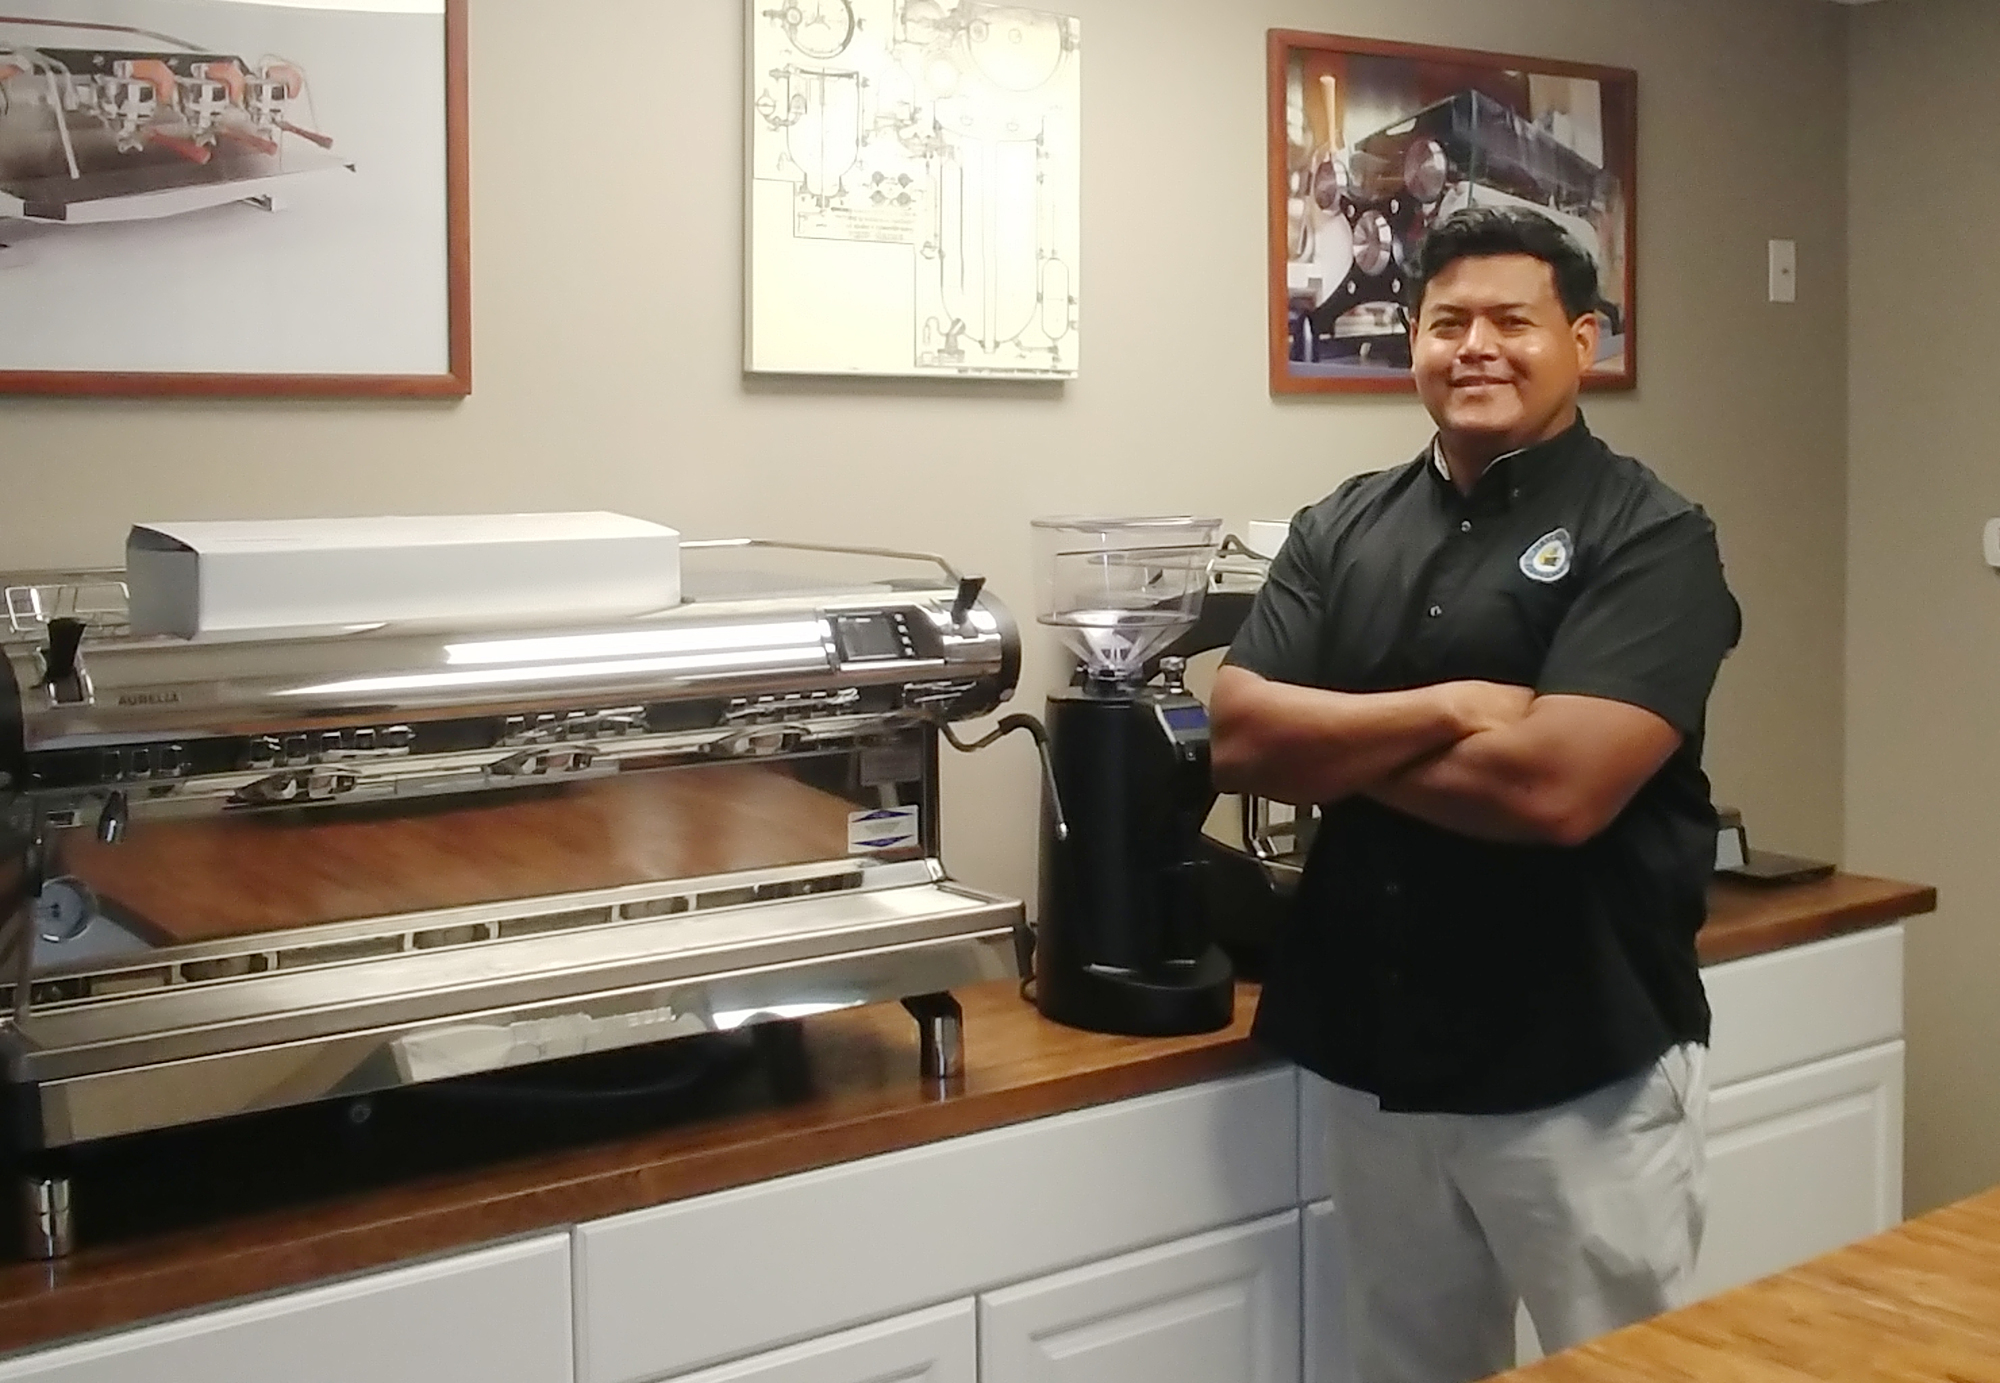 Jose Parada is the owner of First Coast Espresso, a wholesale coffee equipment distributor with commercial repair services and specialty coffee product sales.